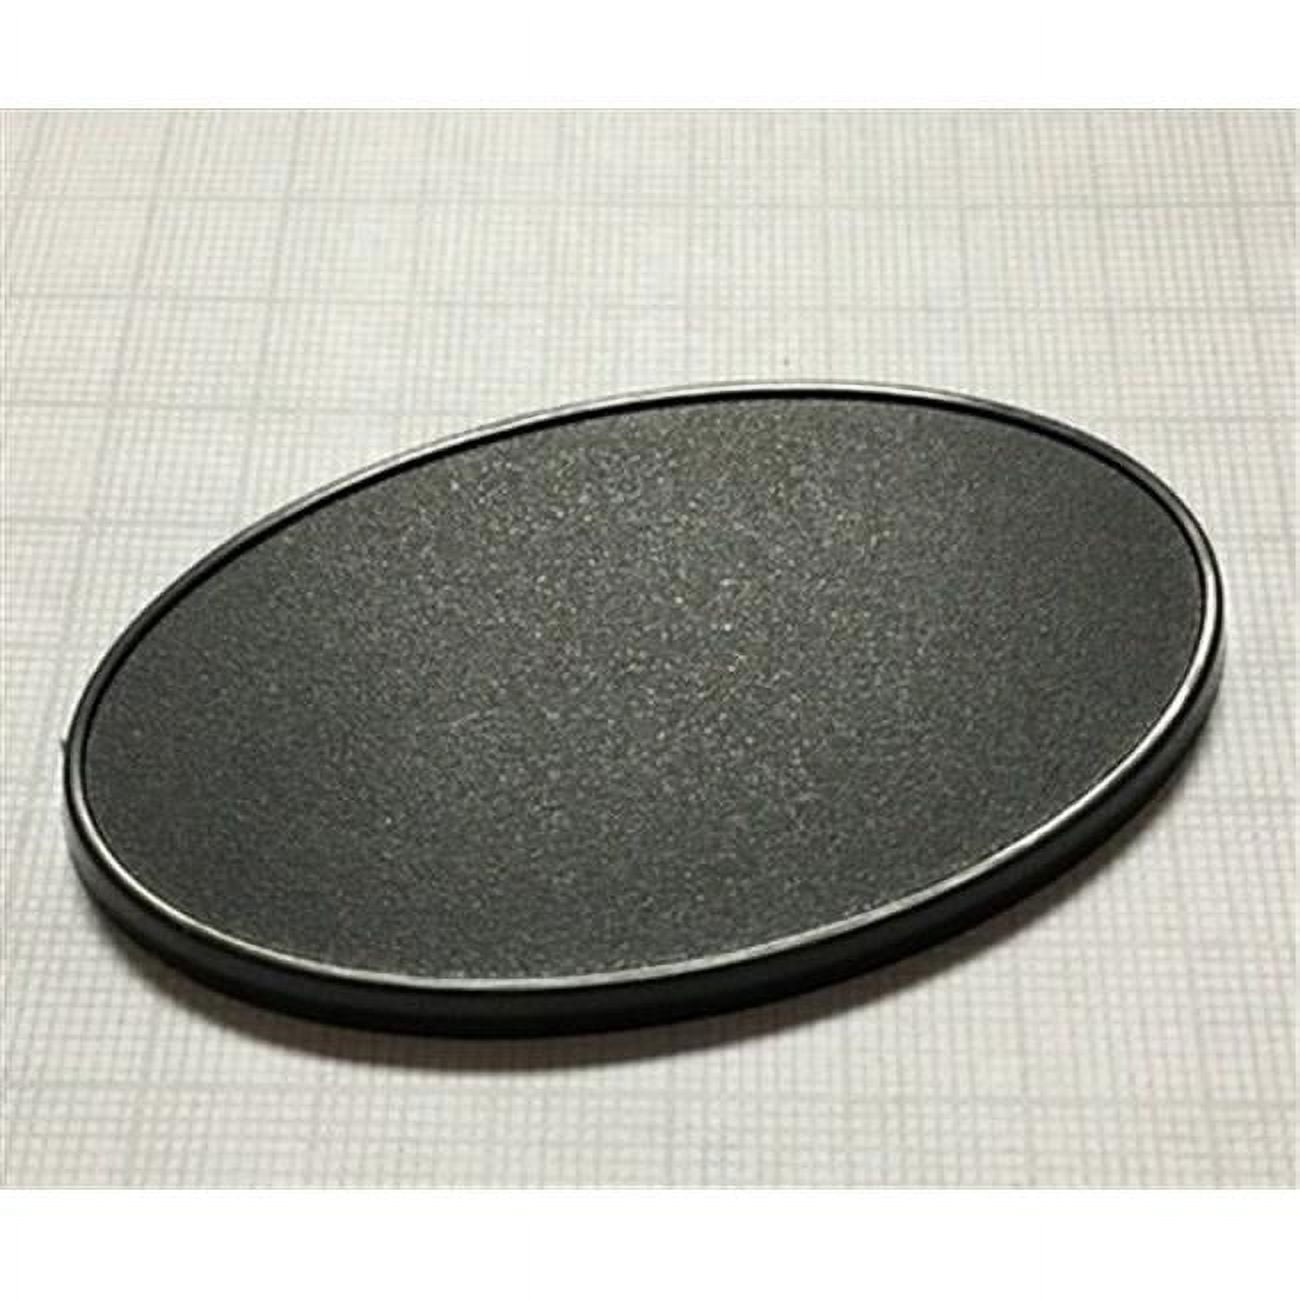 75 X 46 Mm Oval Gaming Base - Set Of 10